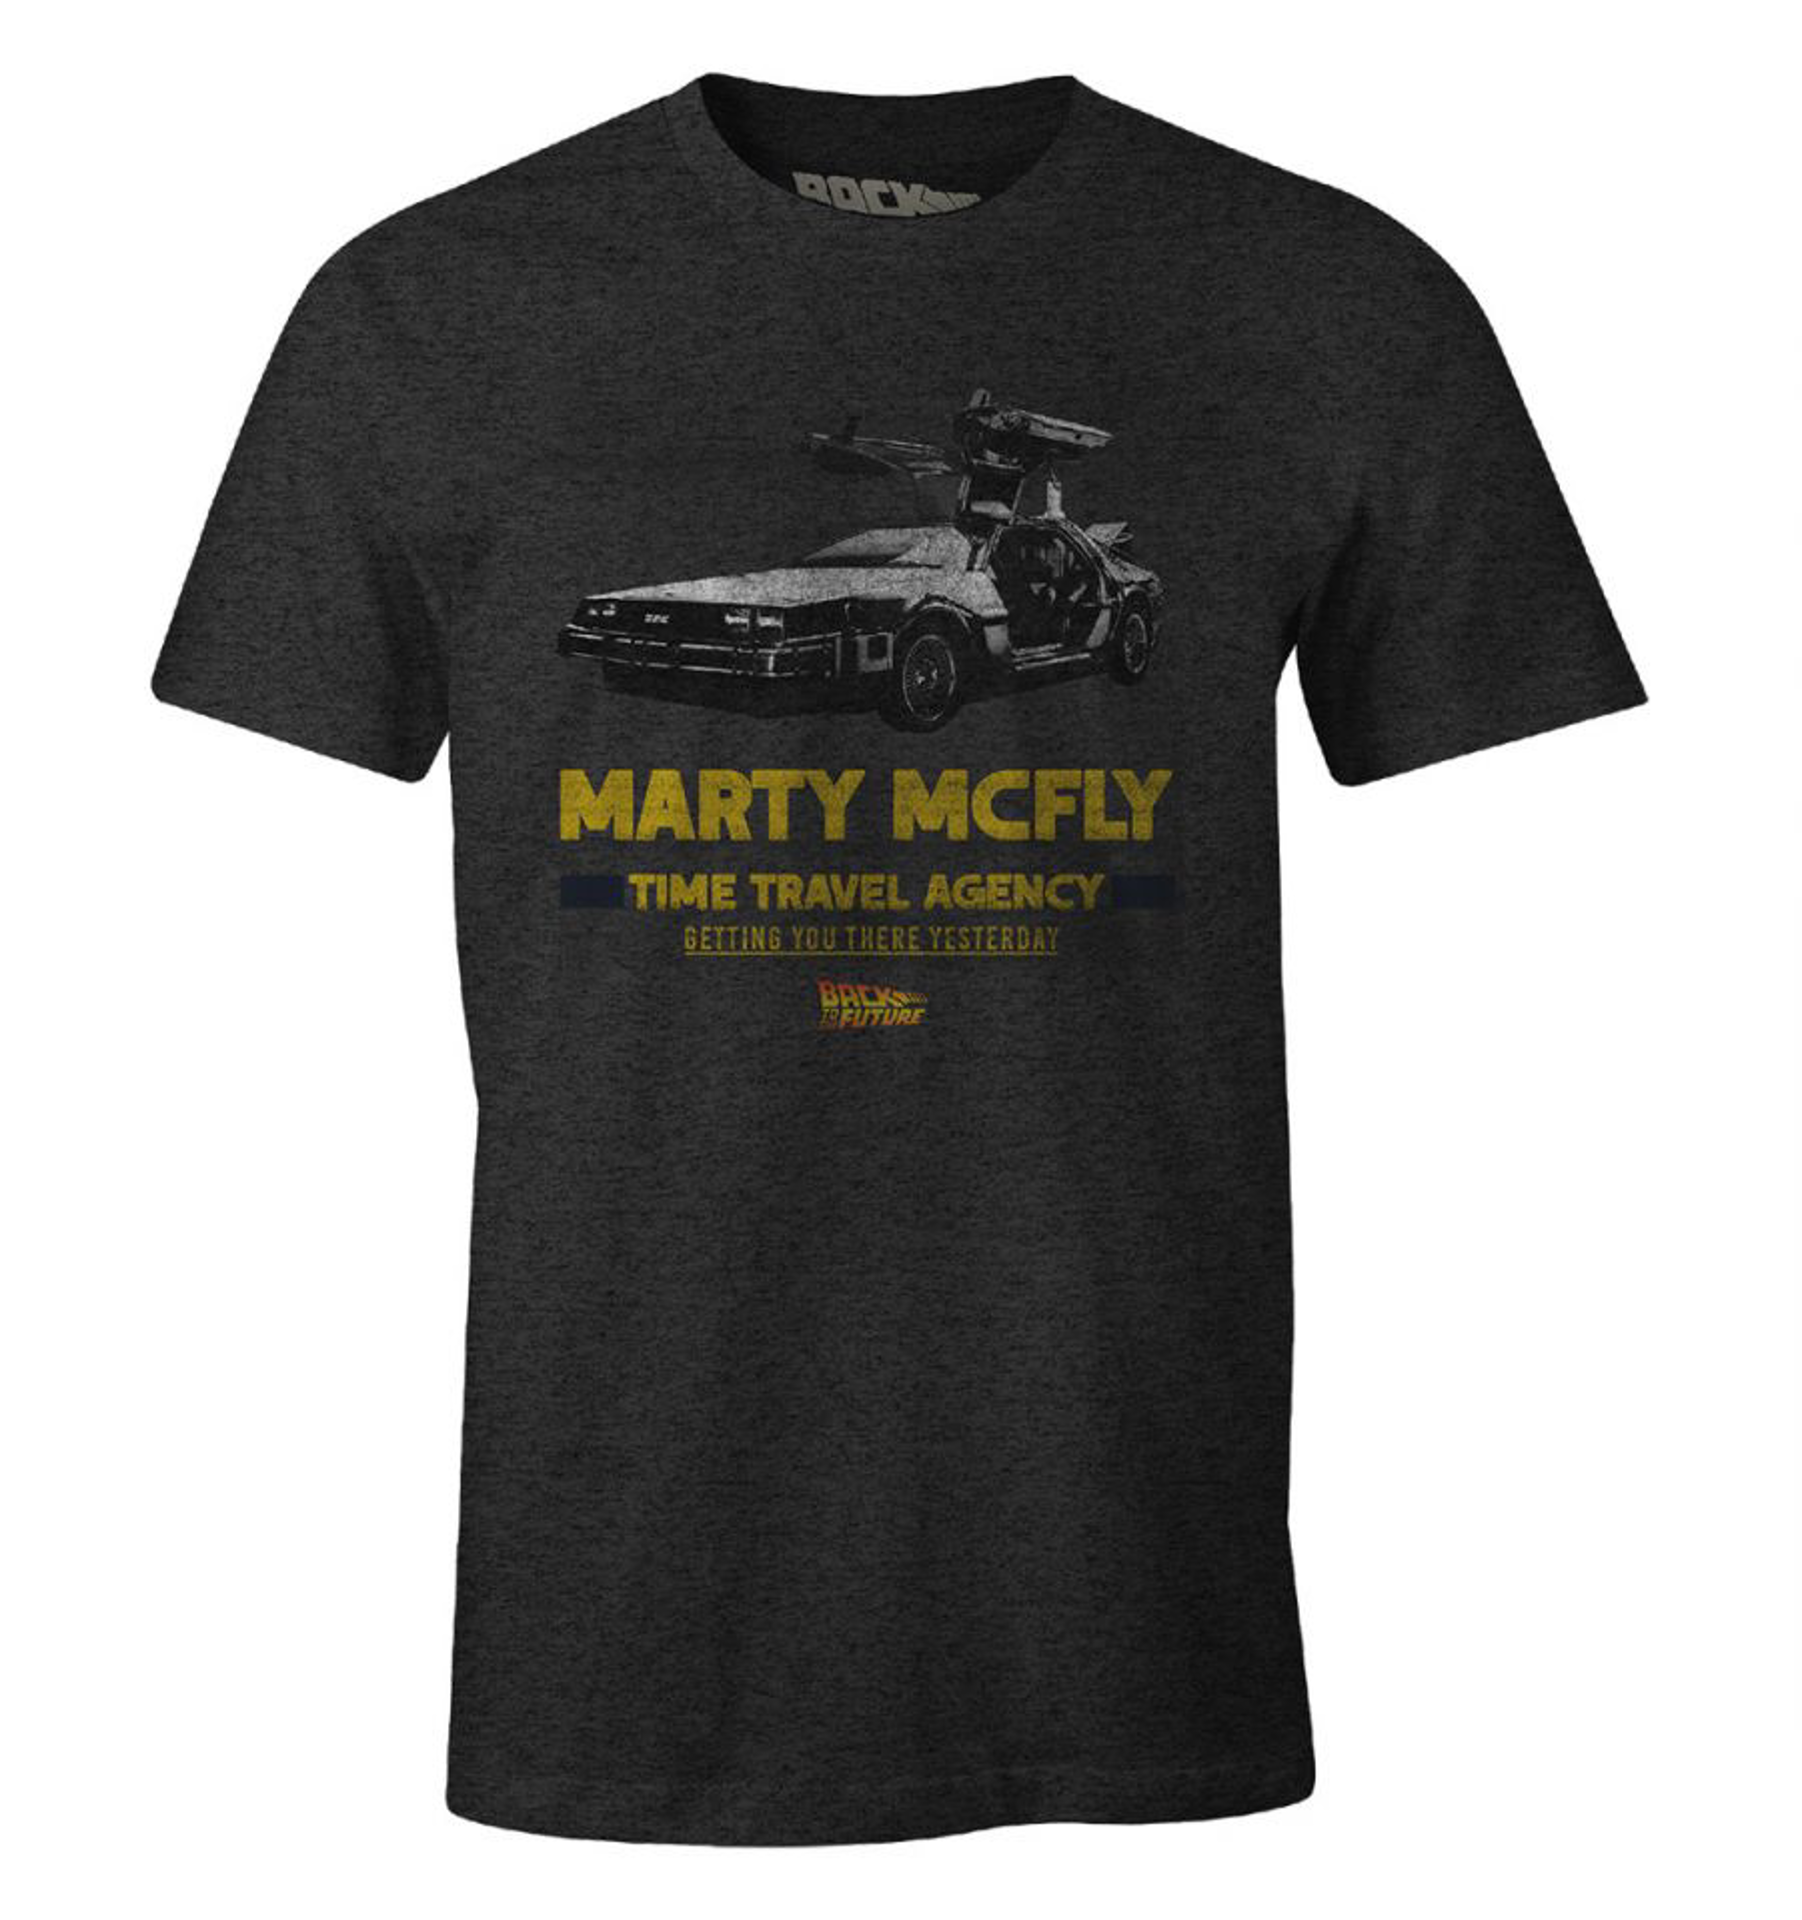 Back to the Future - Marty McFly Anthracite T-Shirt S